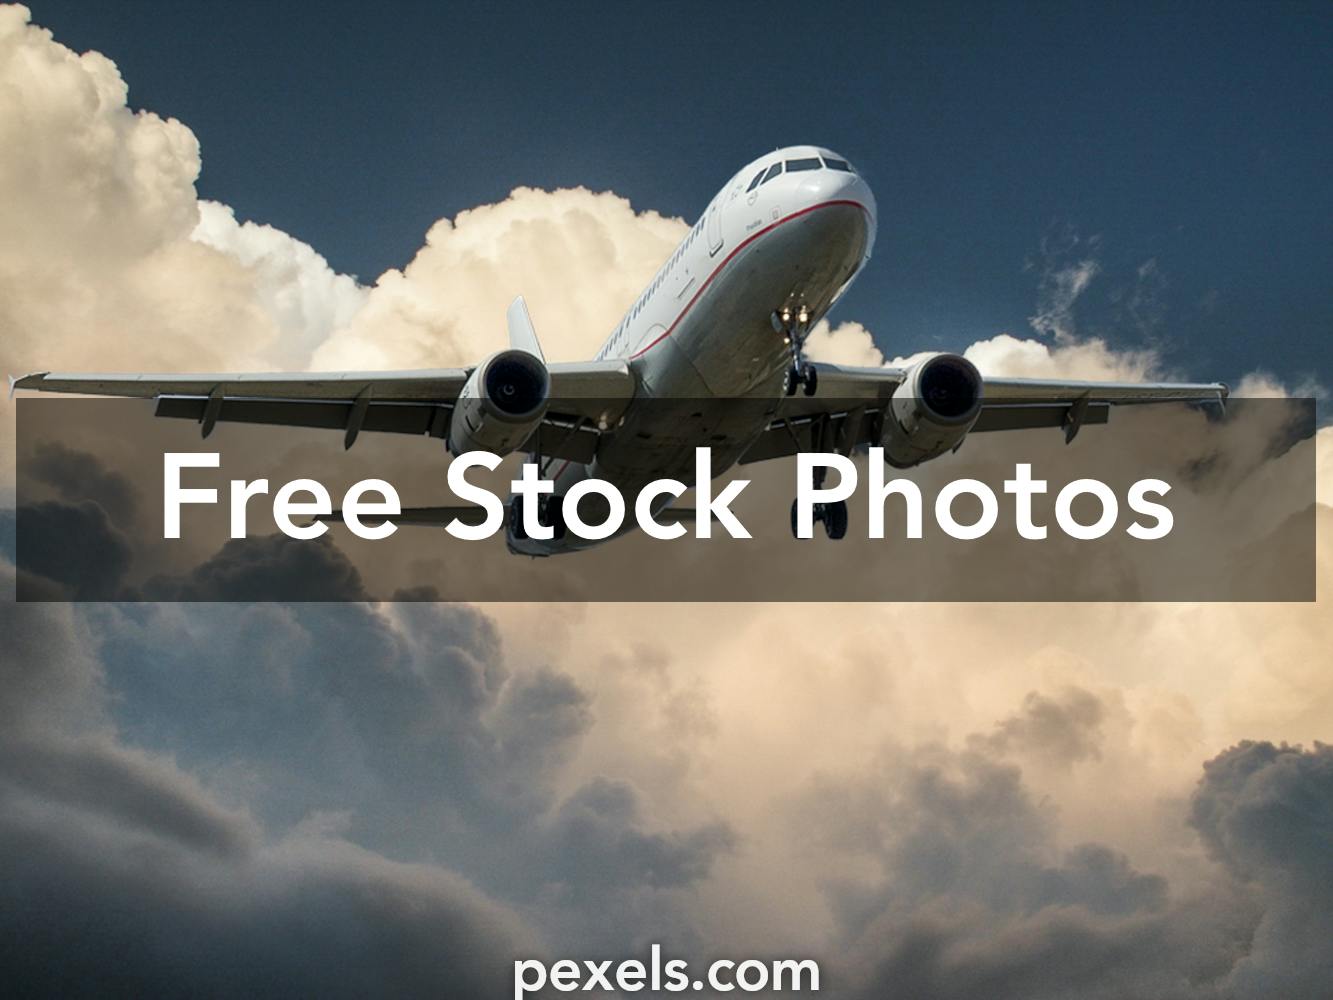 Airplane Photos, Download The BEST Free Airplane Stock Photos & HD Images